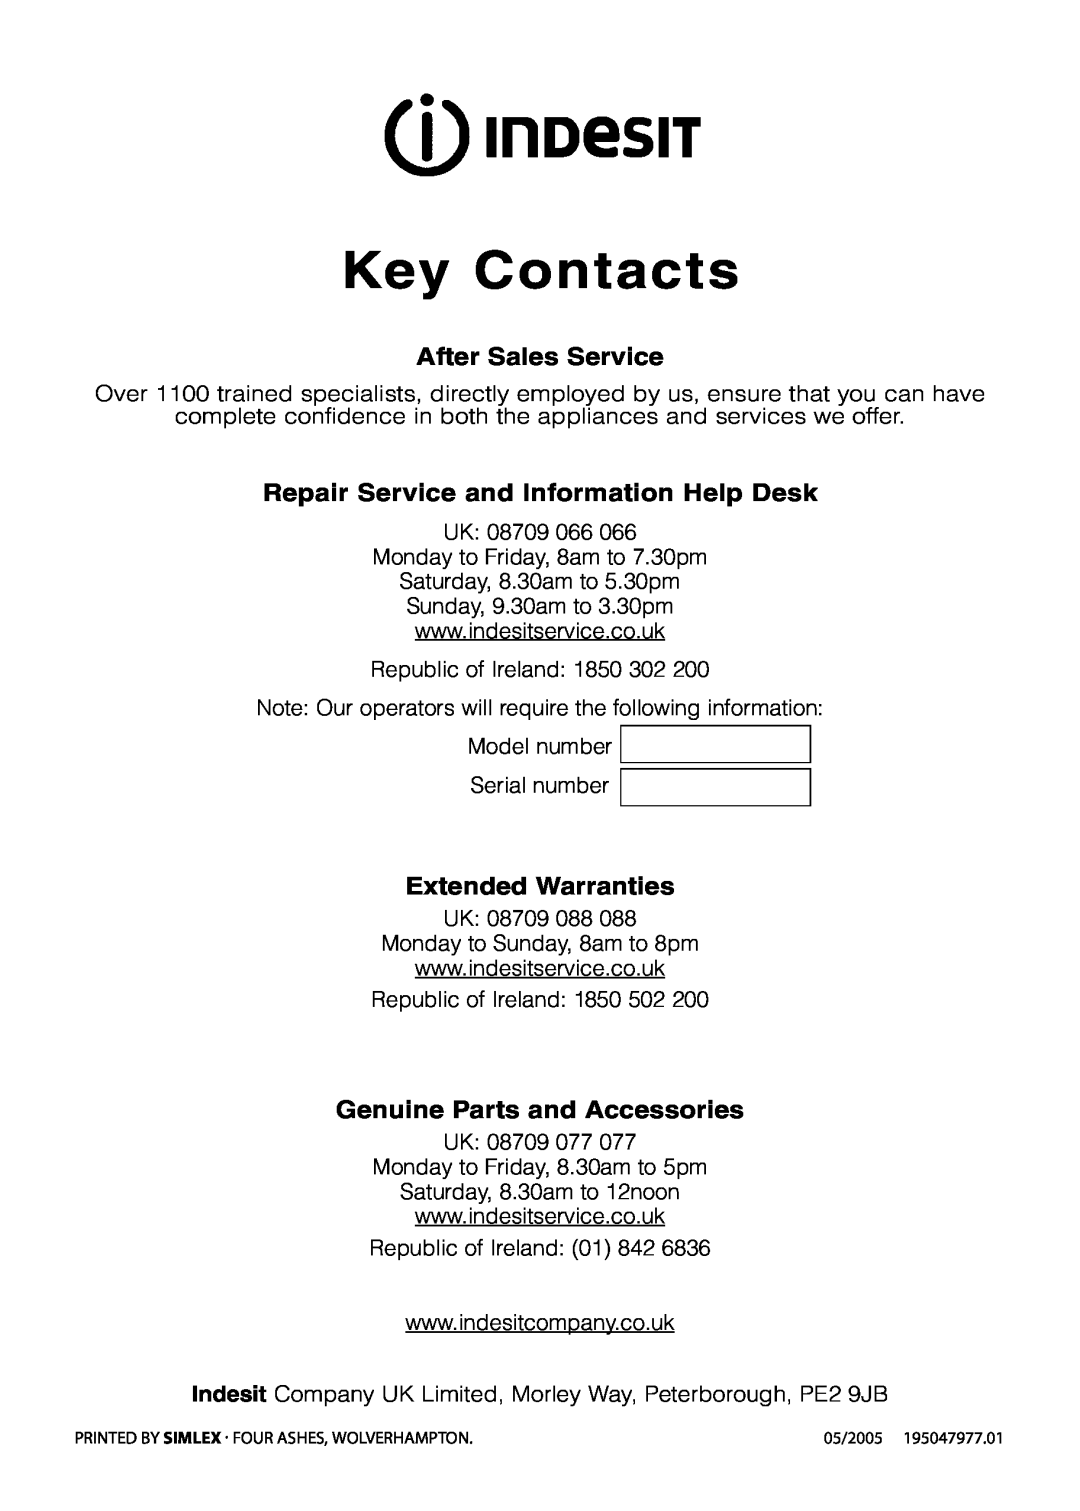 Indesit FIU20 manual Key Contacts, After Sales Service, Repair Service and Information Help Desk, Extended Warranties 